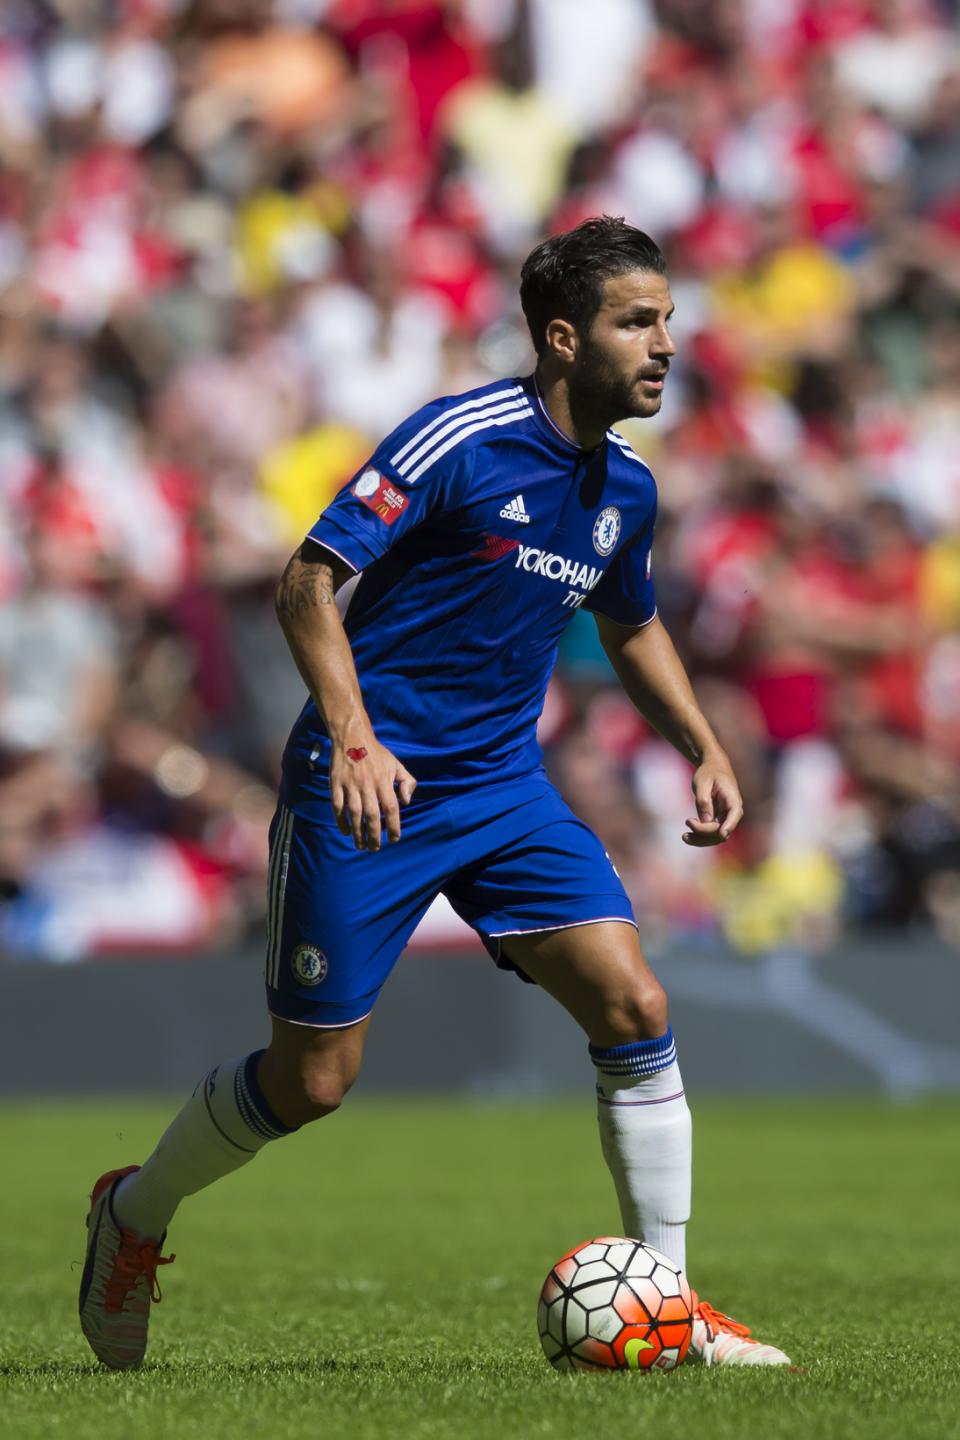 Chelsea's title defence hinges on Costa fitness, Falcao form